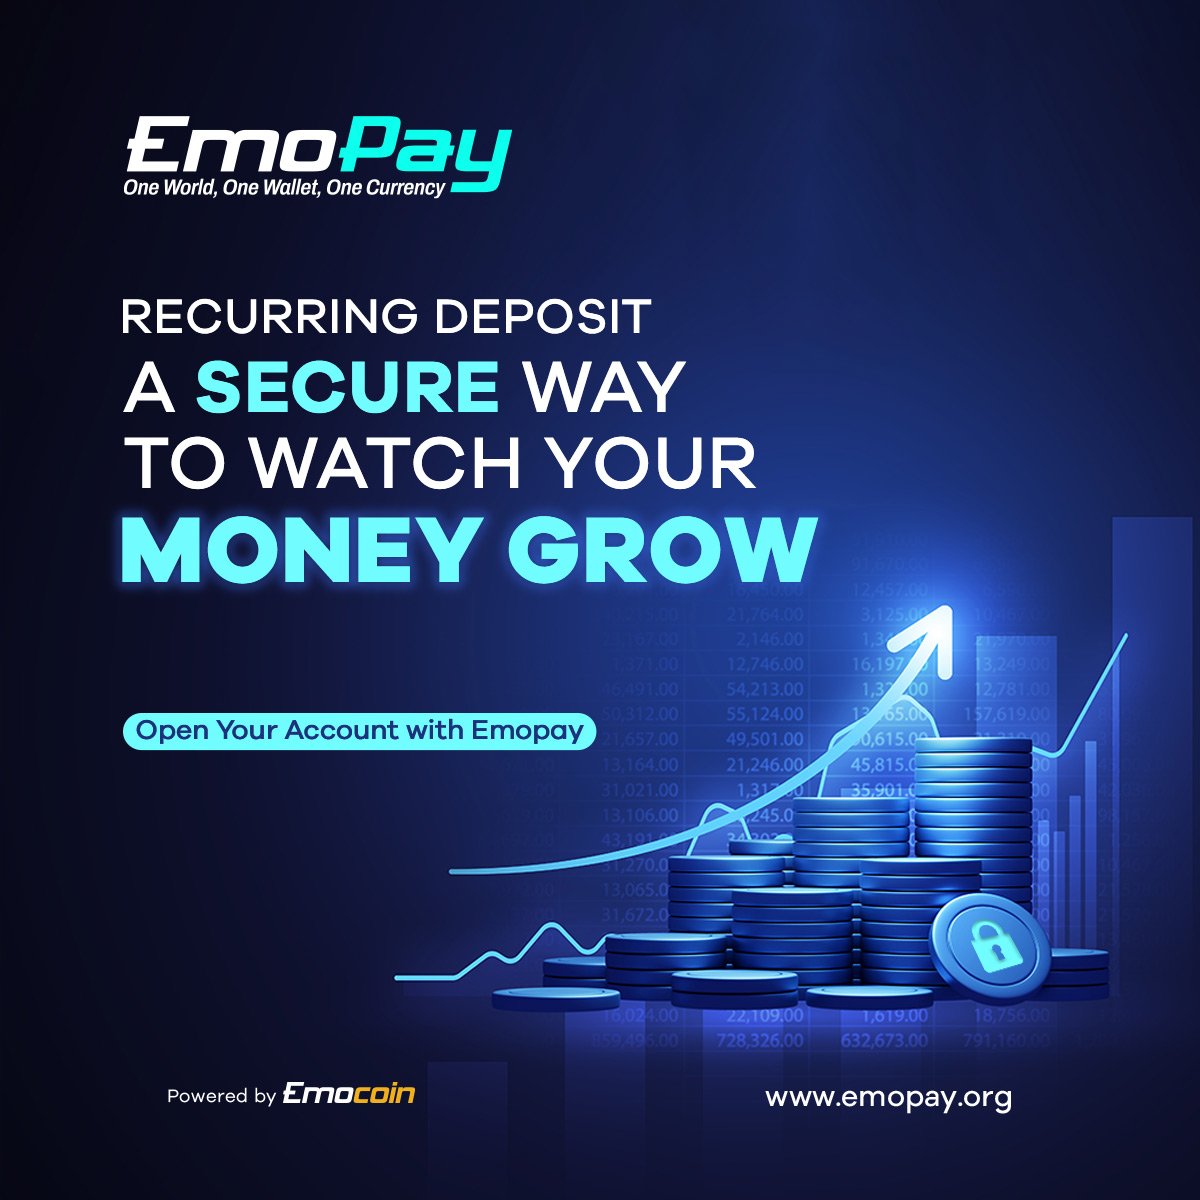 Open Your Account with Emopay and Start Your Recurring Deposit Journey Today! 🚀💰

Visit 👉🏻 emopay.org

#Emopay #SecureInvestments #Crypto #CryptoNews #RecurringDeposit #Emocoin #Cryptocurency #FinancialGrowth #WatchYourWealthGrow #Friday #InvestSmart #GrowYourMoney